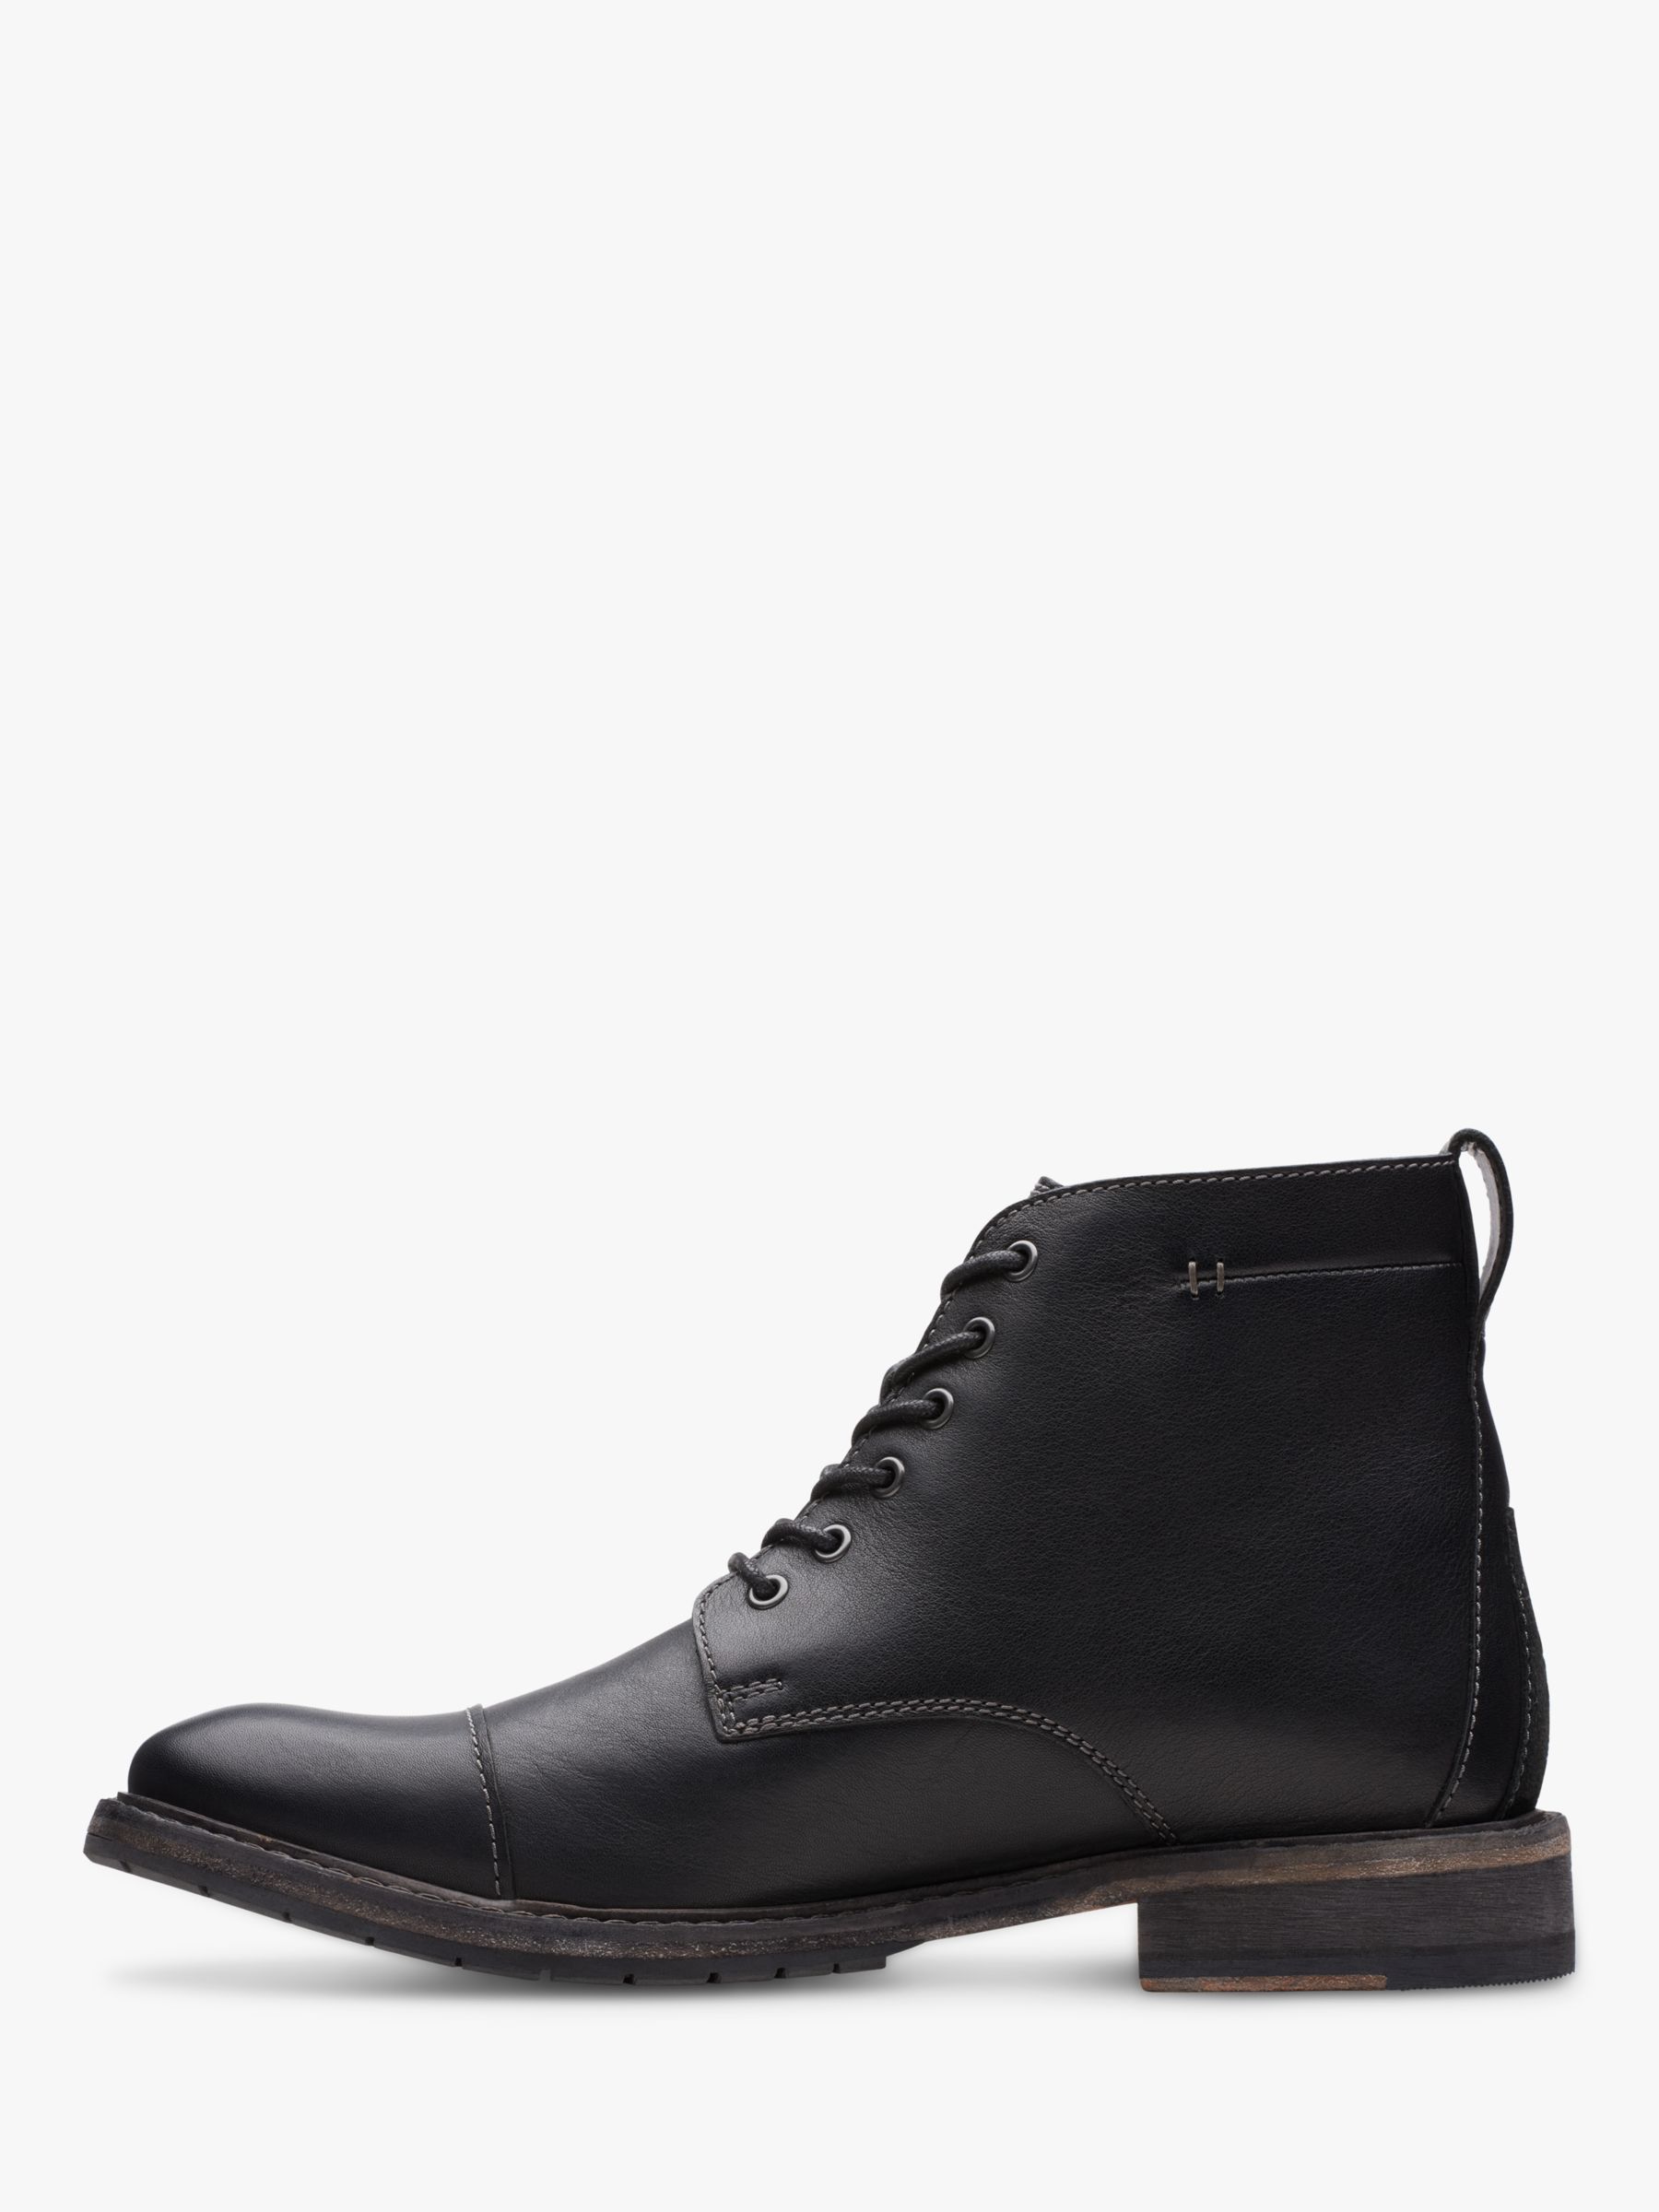 Clarks Clarkdale Hill Leather Boots at John Lewis & Partners